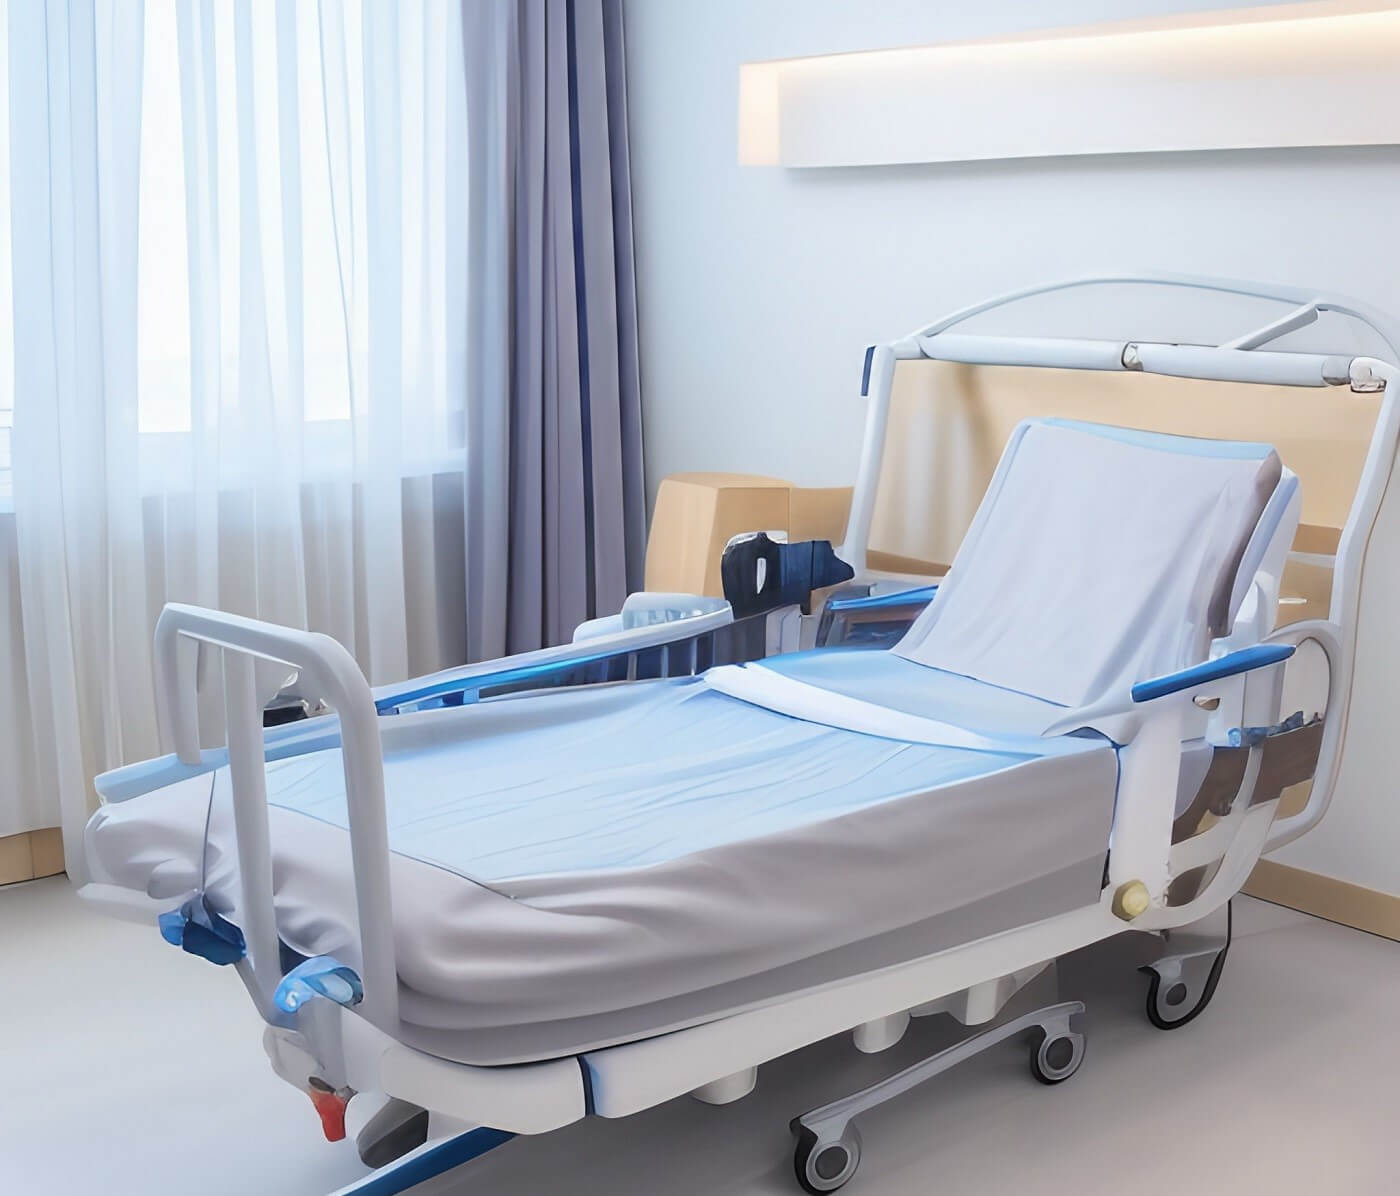 6 Characteristics of the Best Hospital Blankets